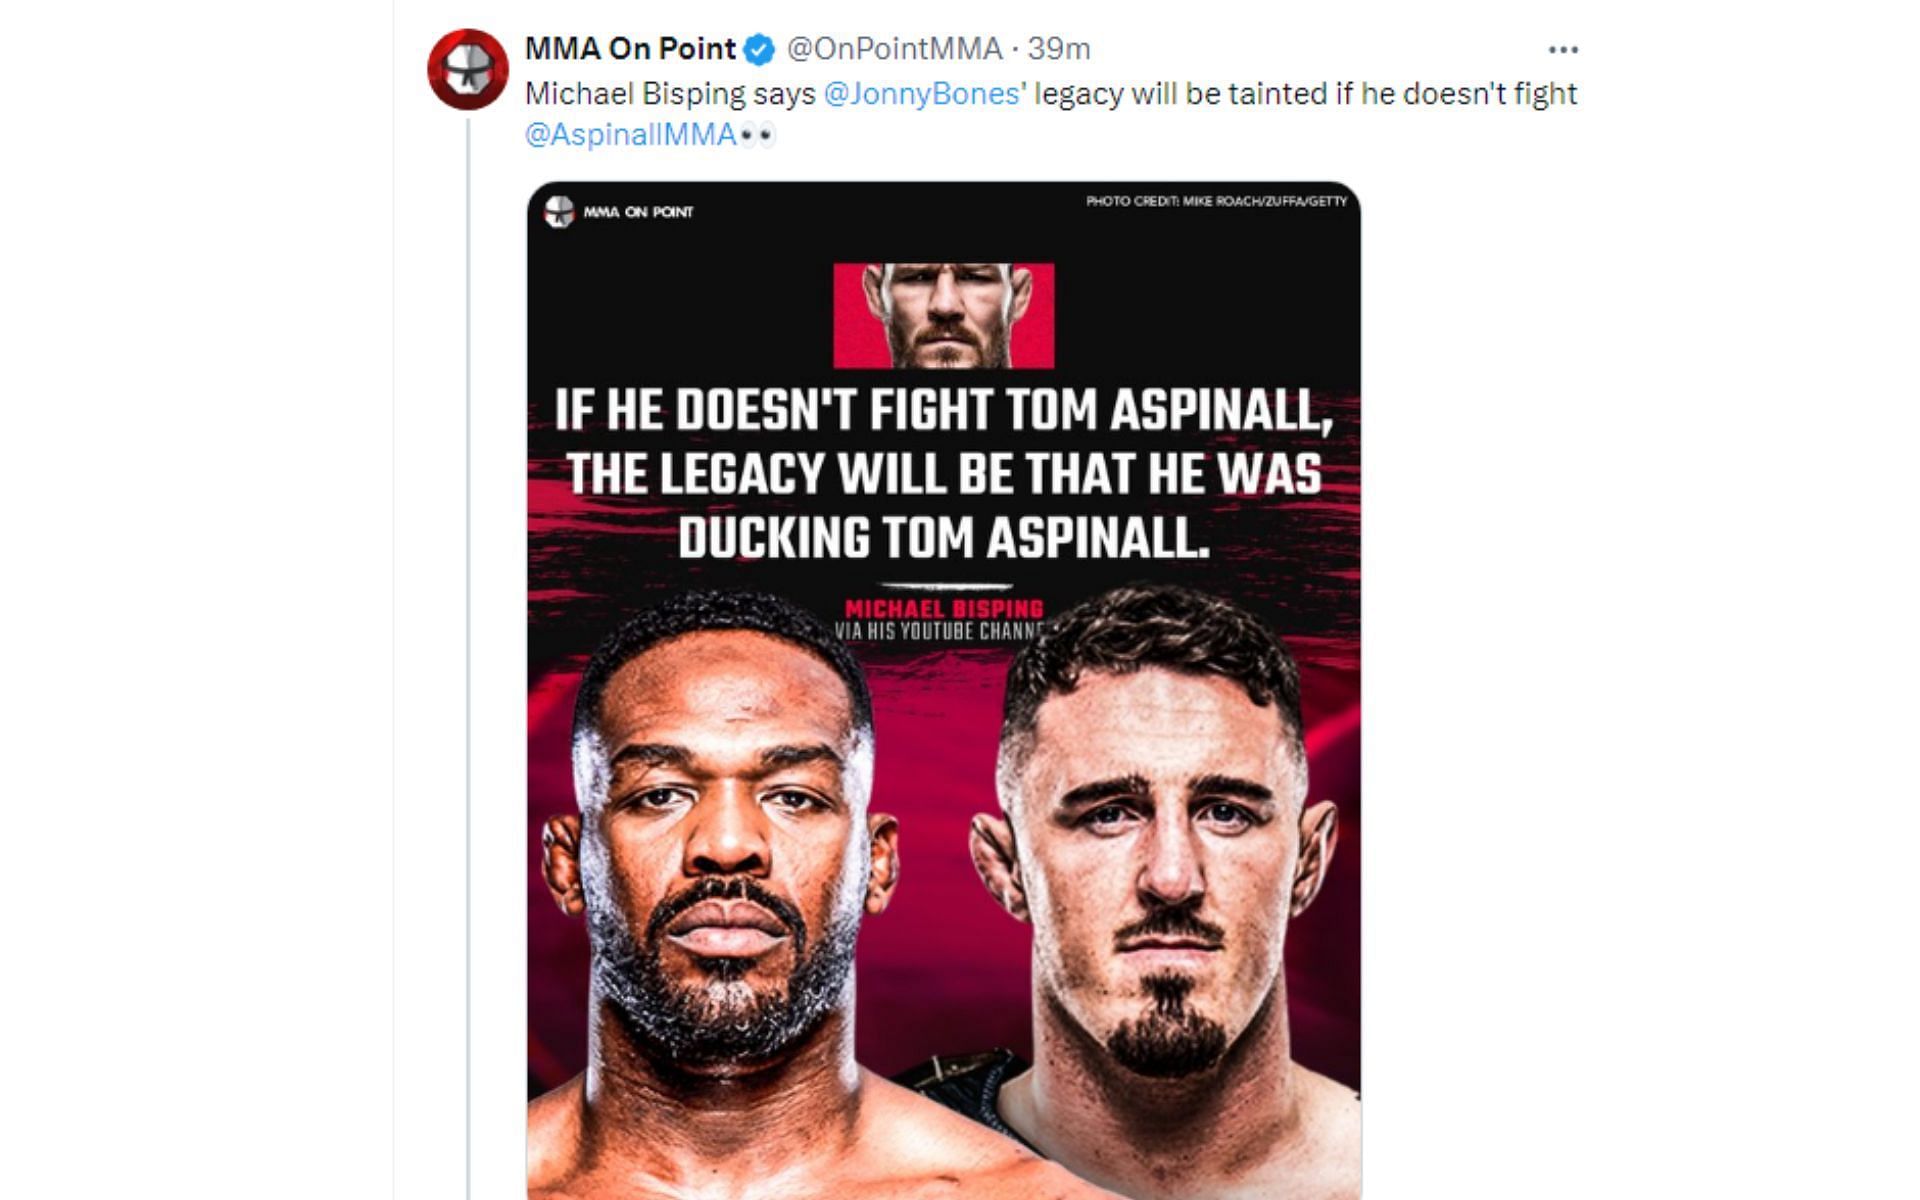 Tweet regarding Bisping&#039;s comments about Jones [Image courtesy: @OnPointMMA - X]